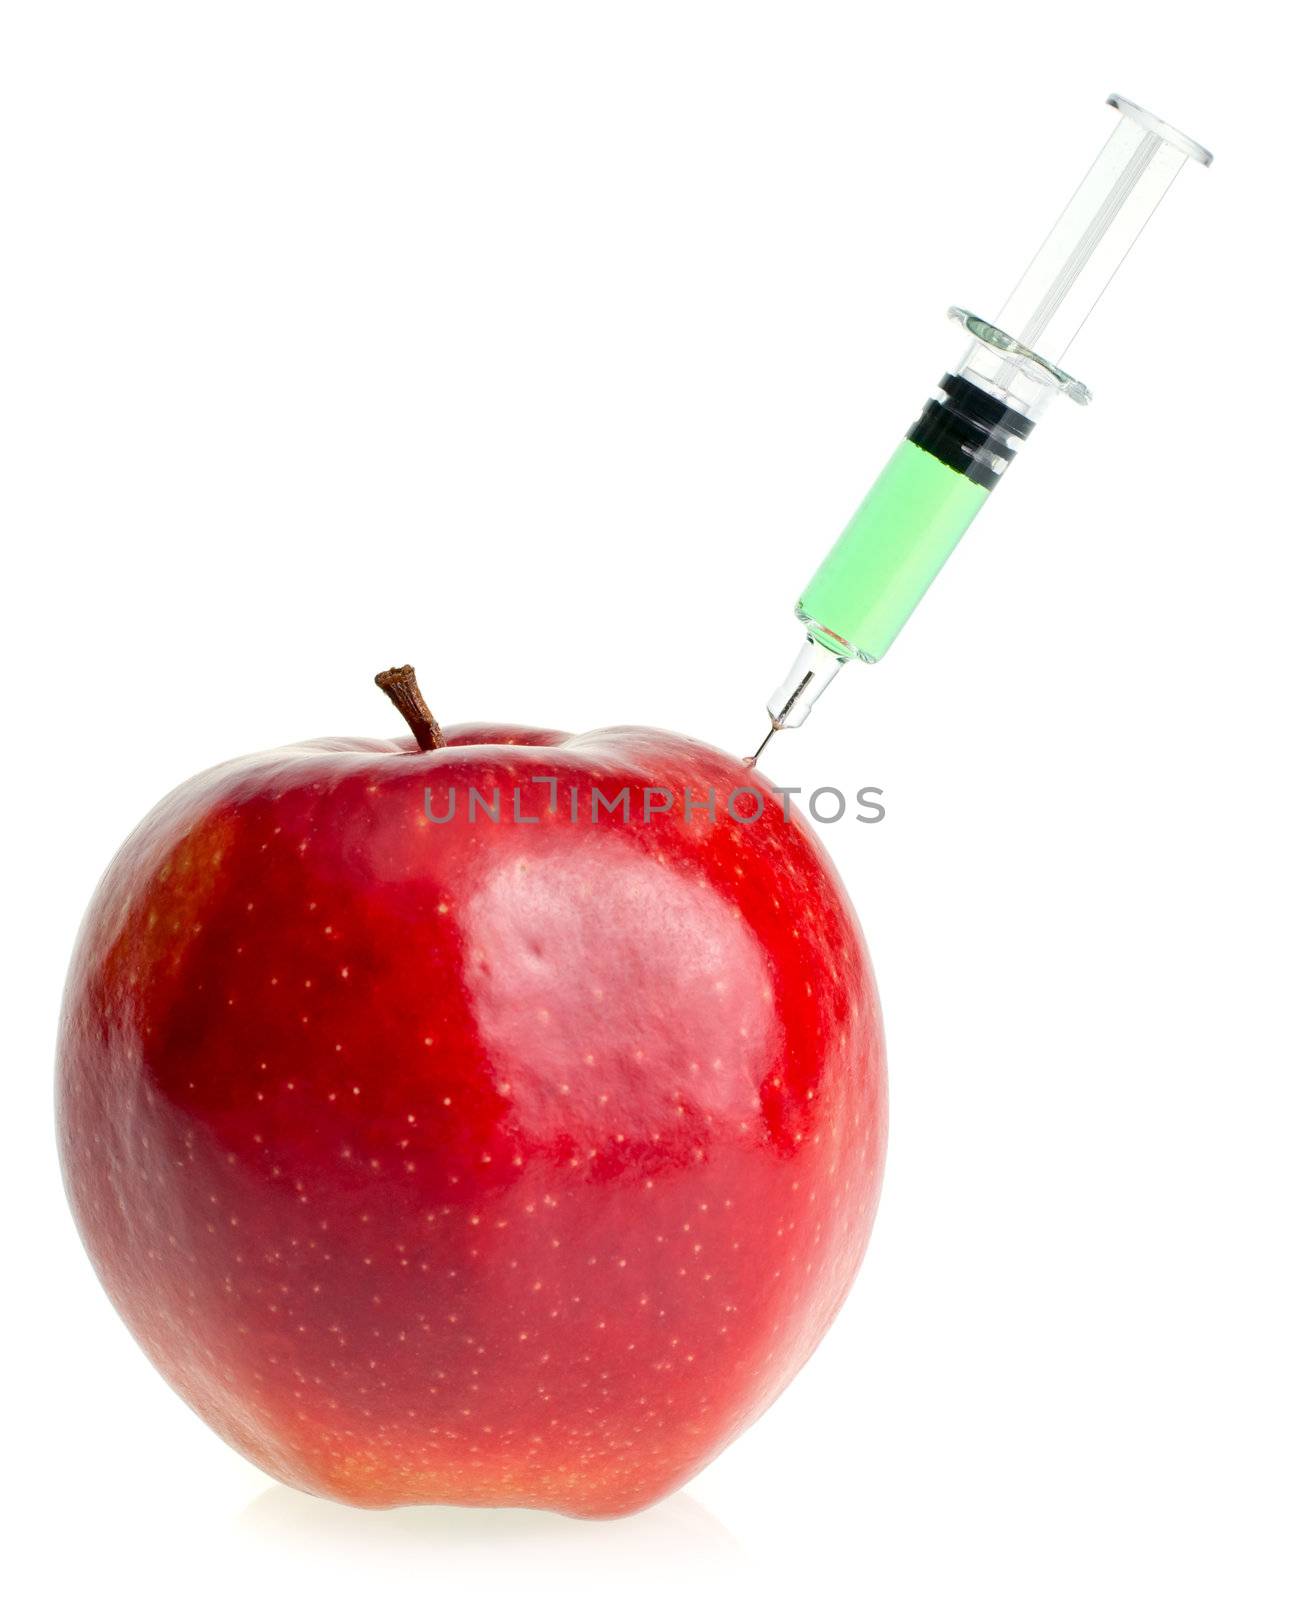 Apple with syringe by naumoid